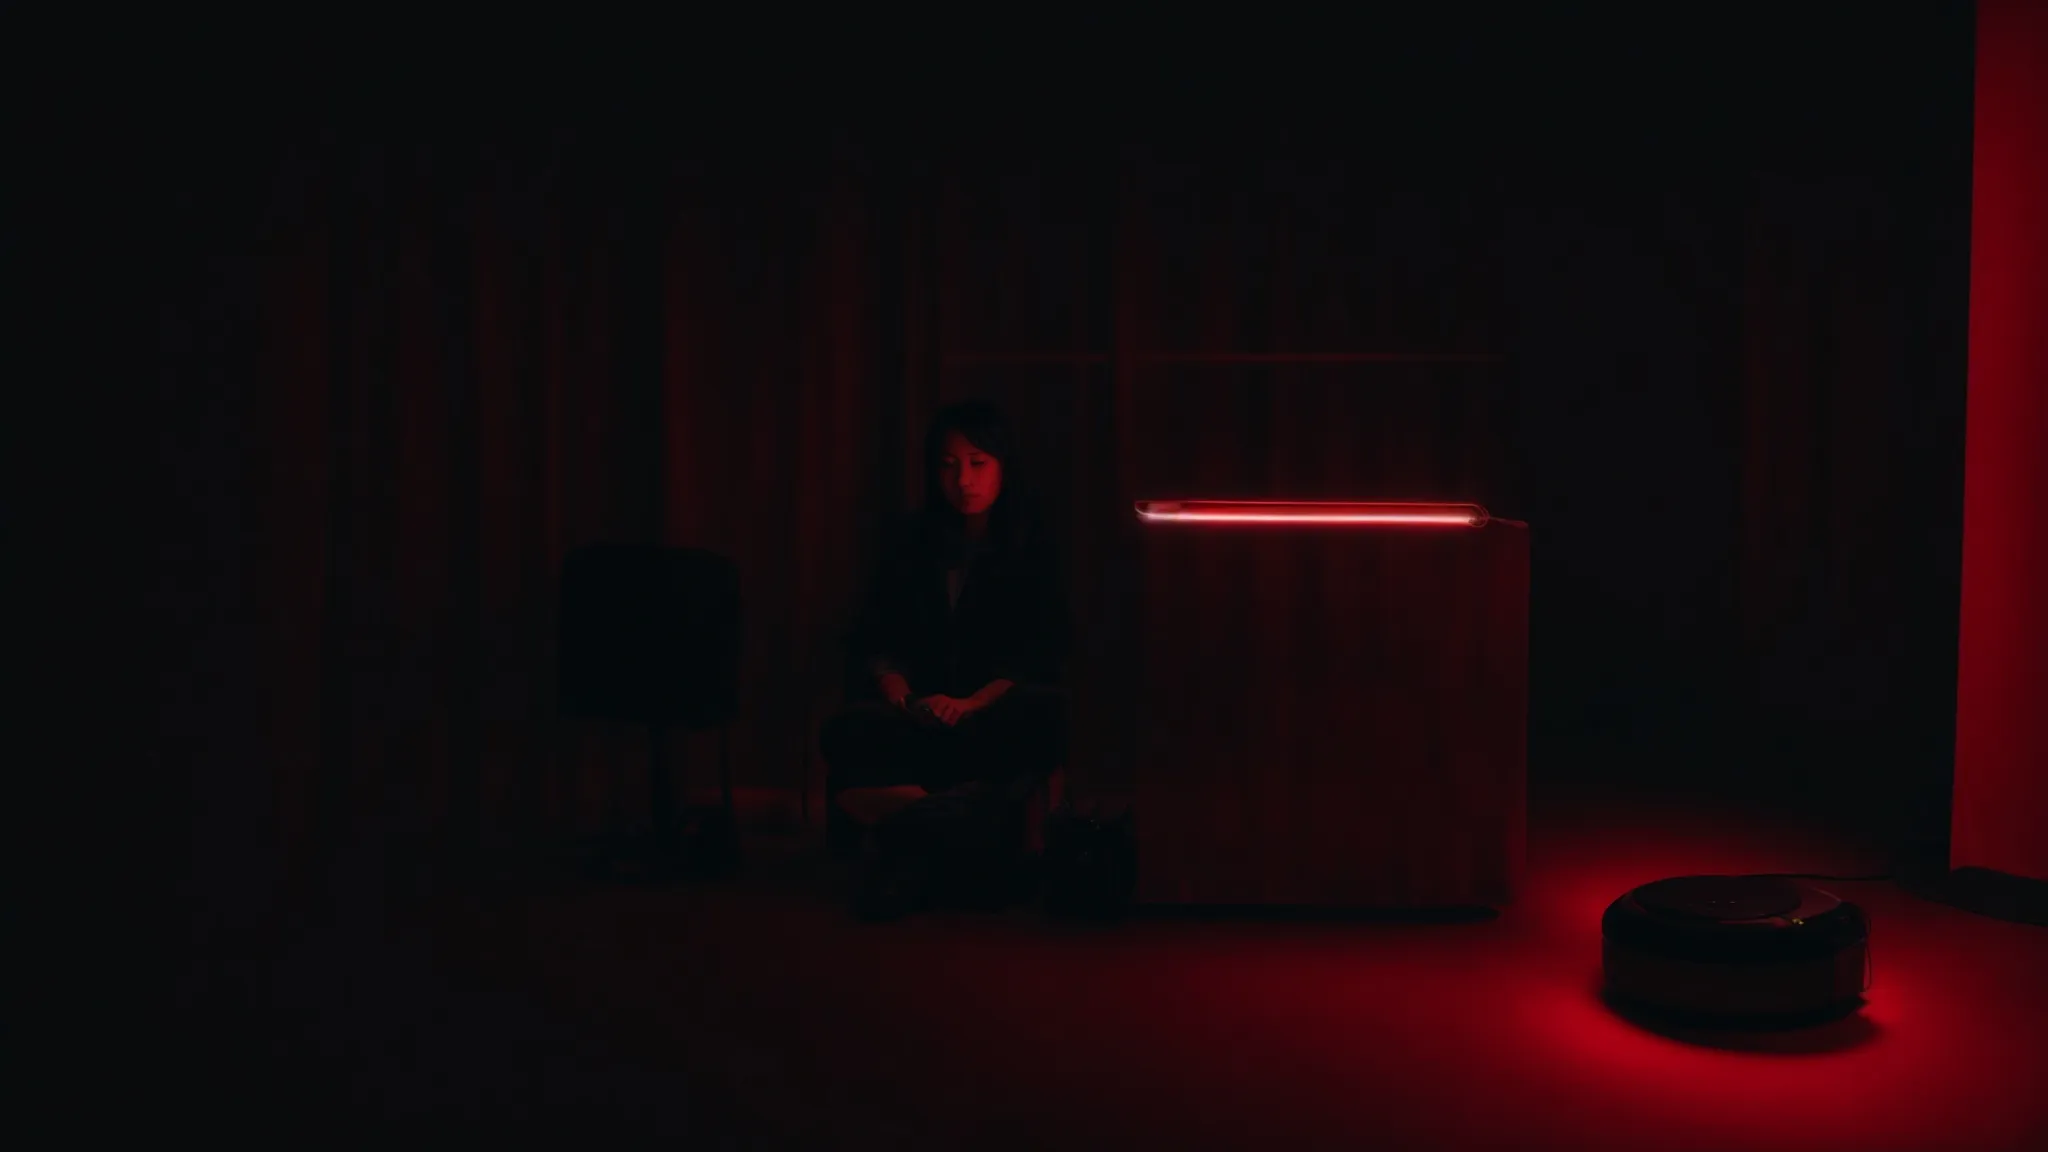 a person sits comfortably in a dimly lit room while a soft red glow emanates from a therapy device positioned in front of their face.